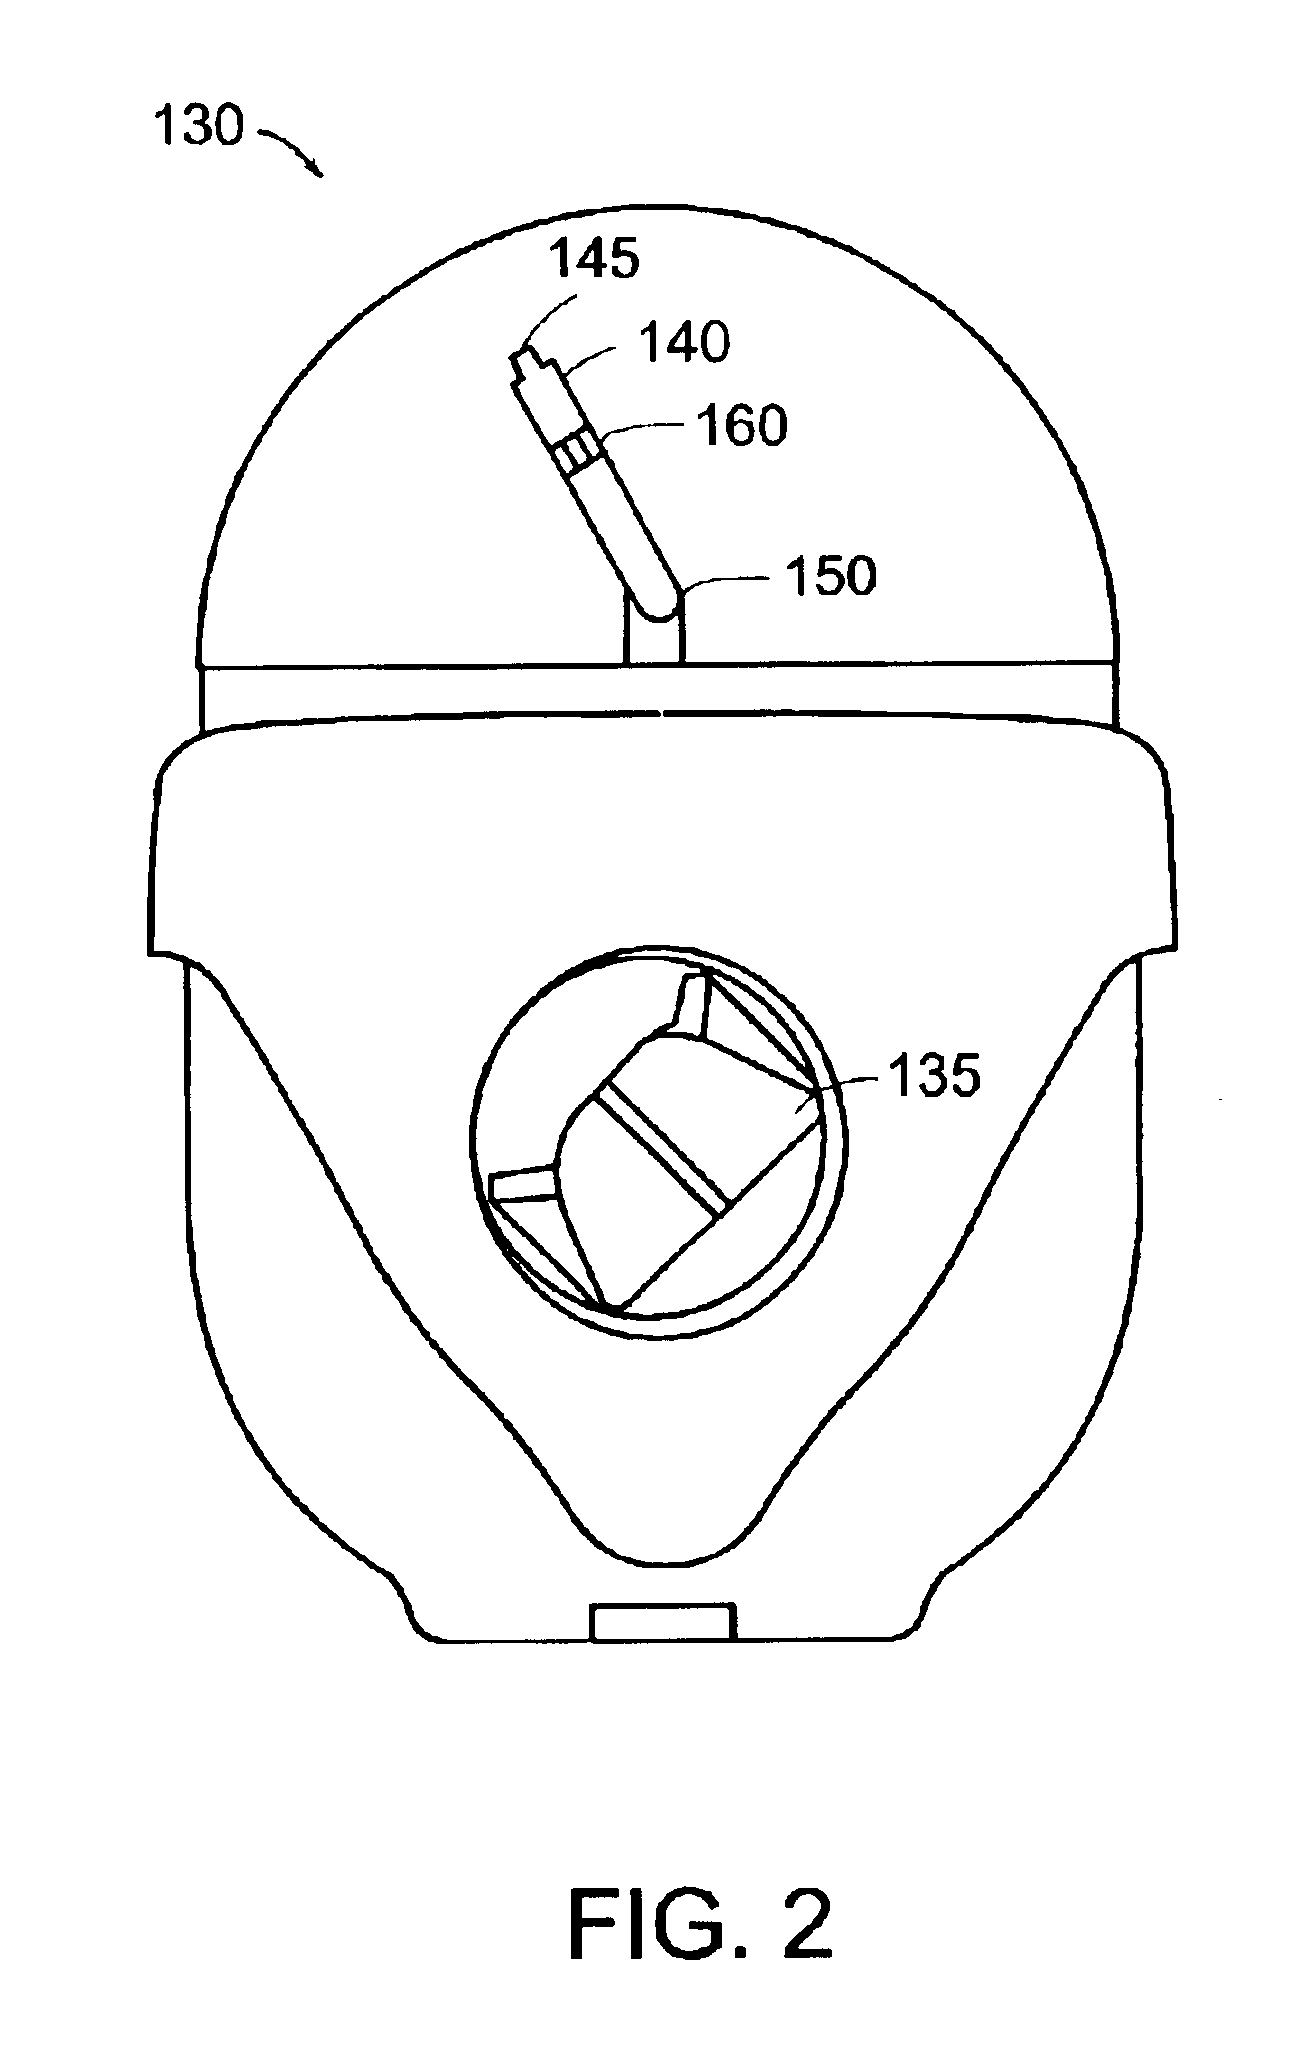 Method and system for remote control of mobile robot